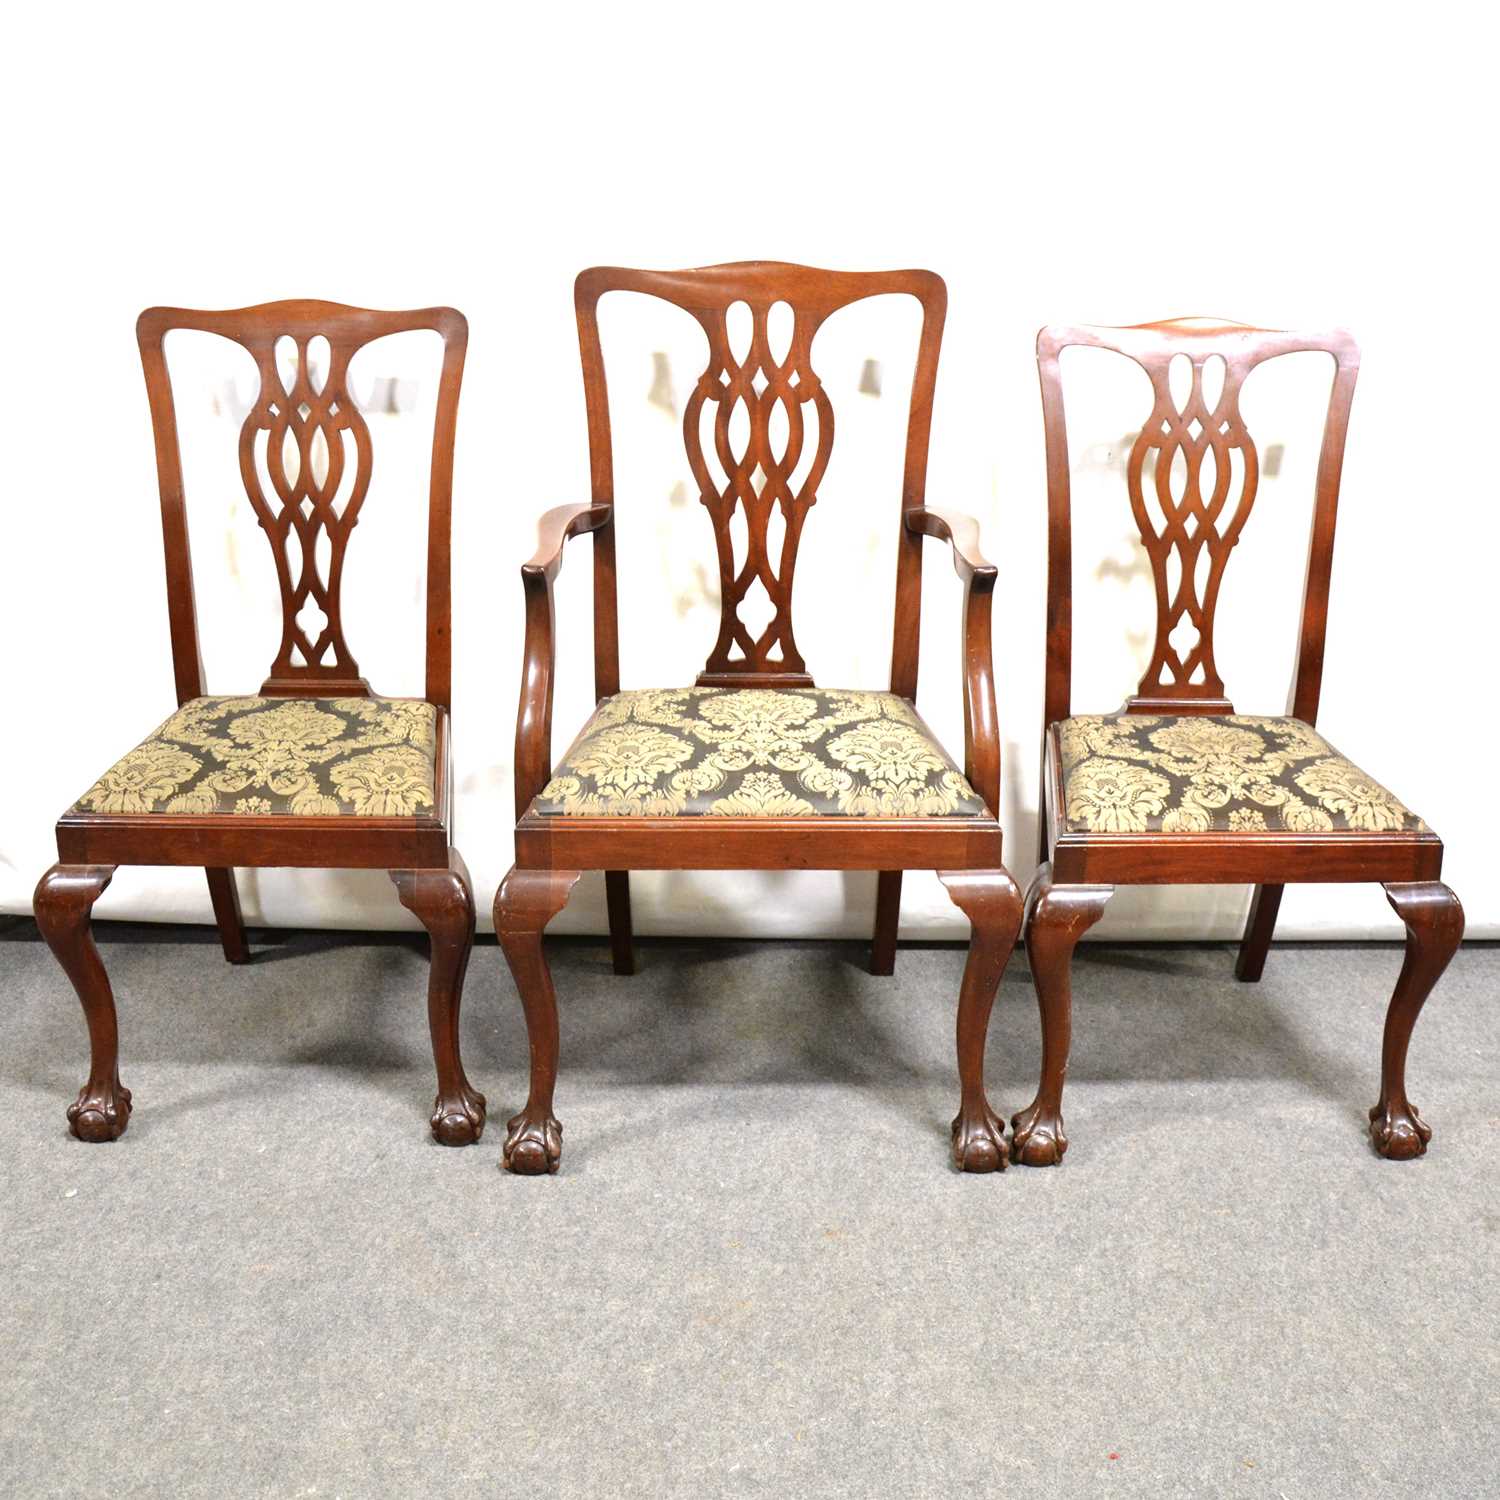 Late Victorian mahogany dining table and chairs, - Image 2 of 2